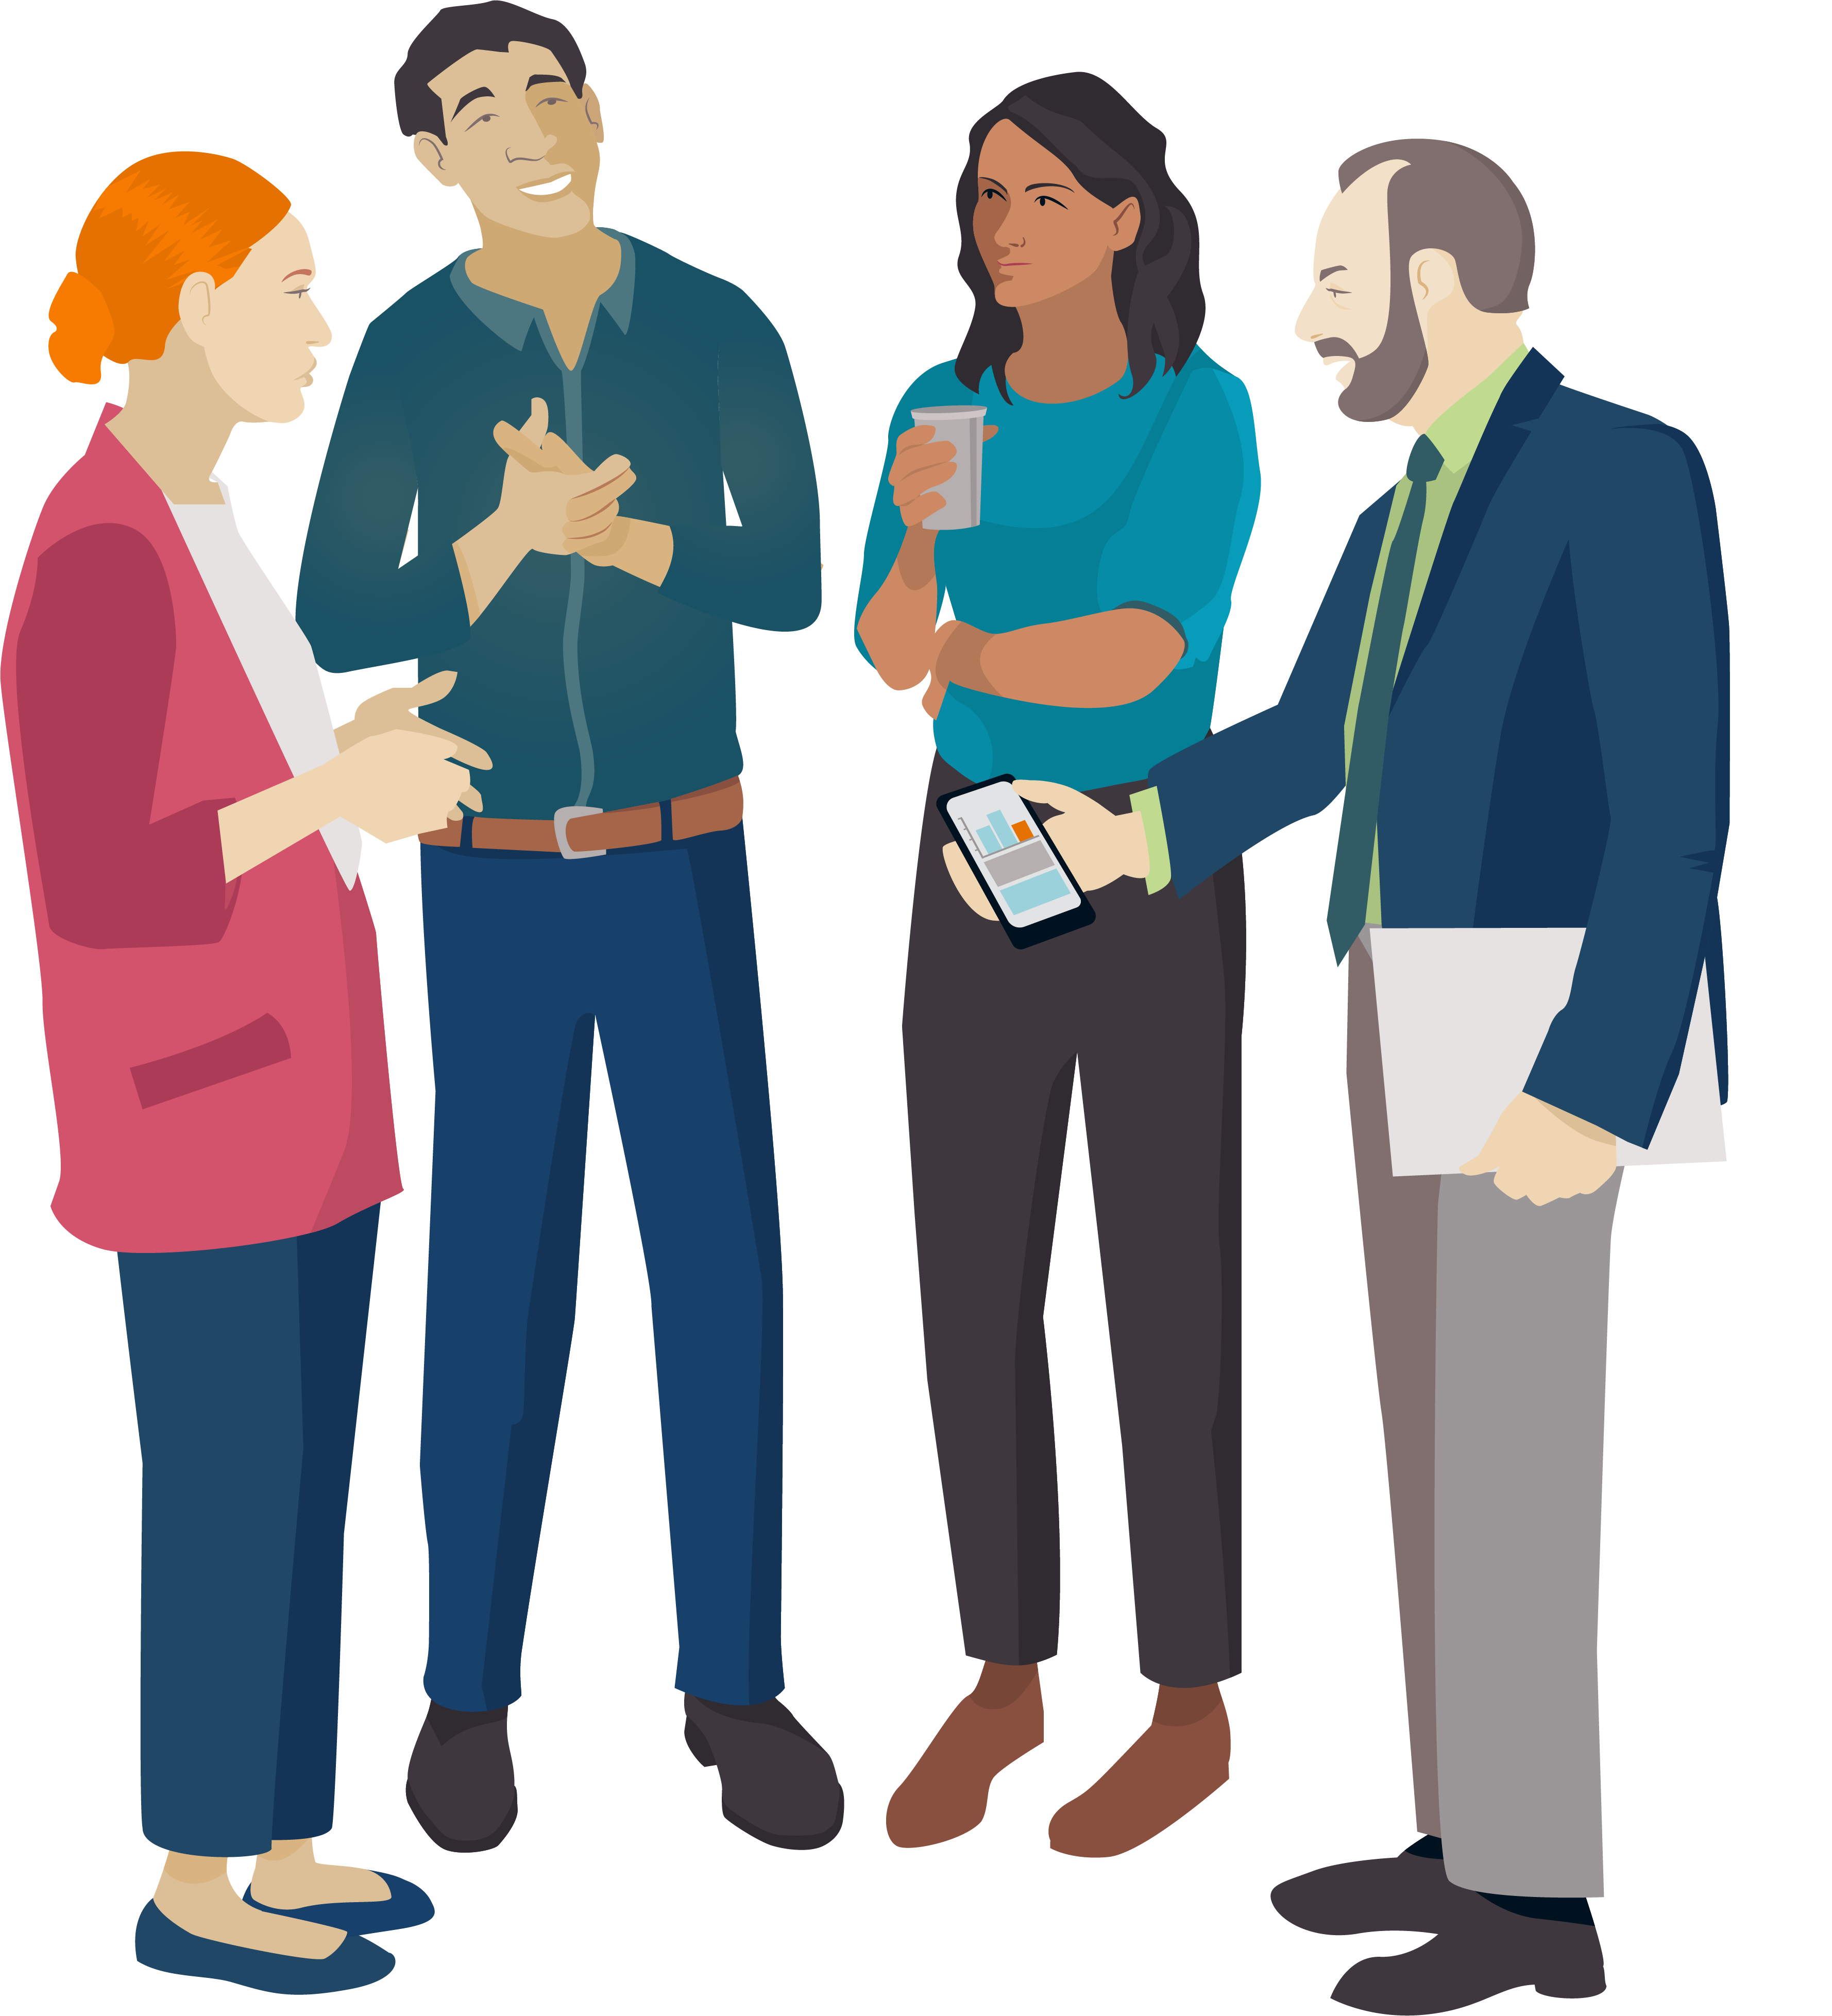 Illustration of four people talking with one person holding out a mobile phone